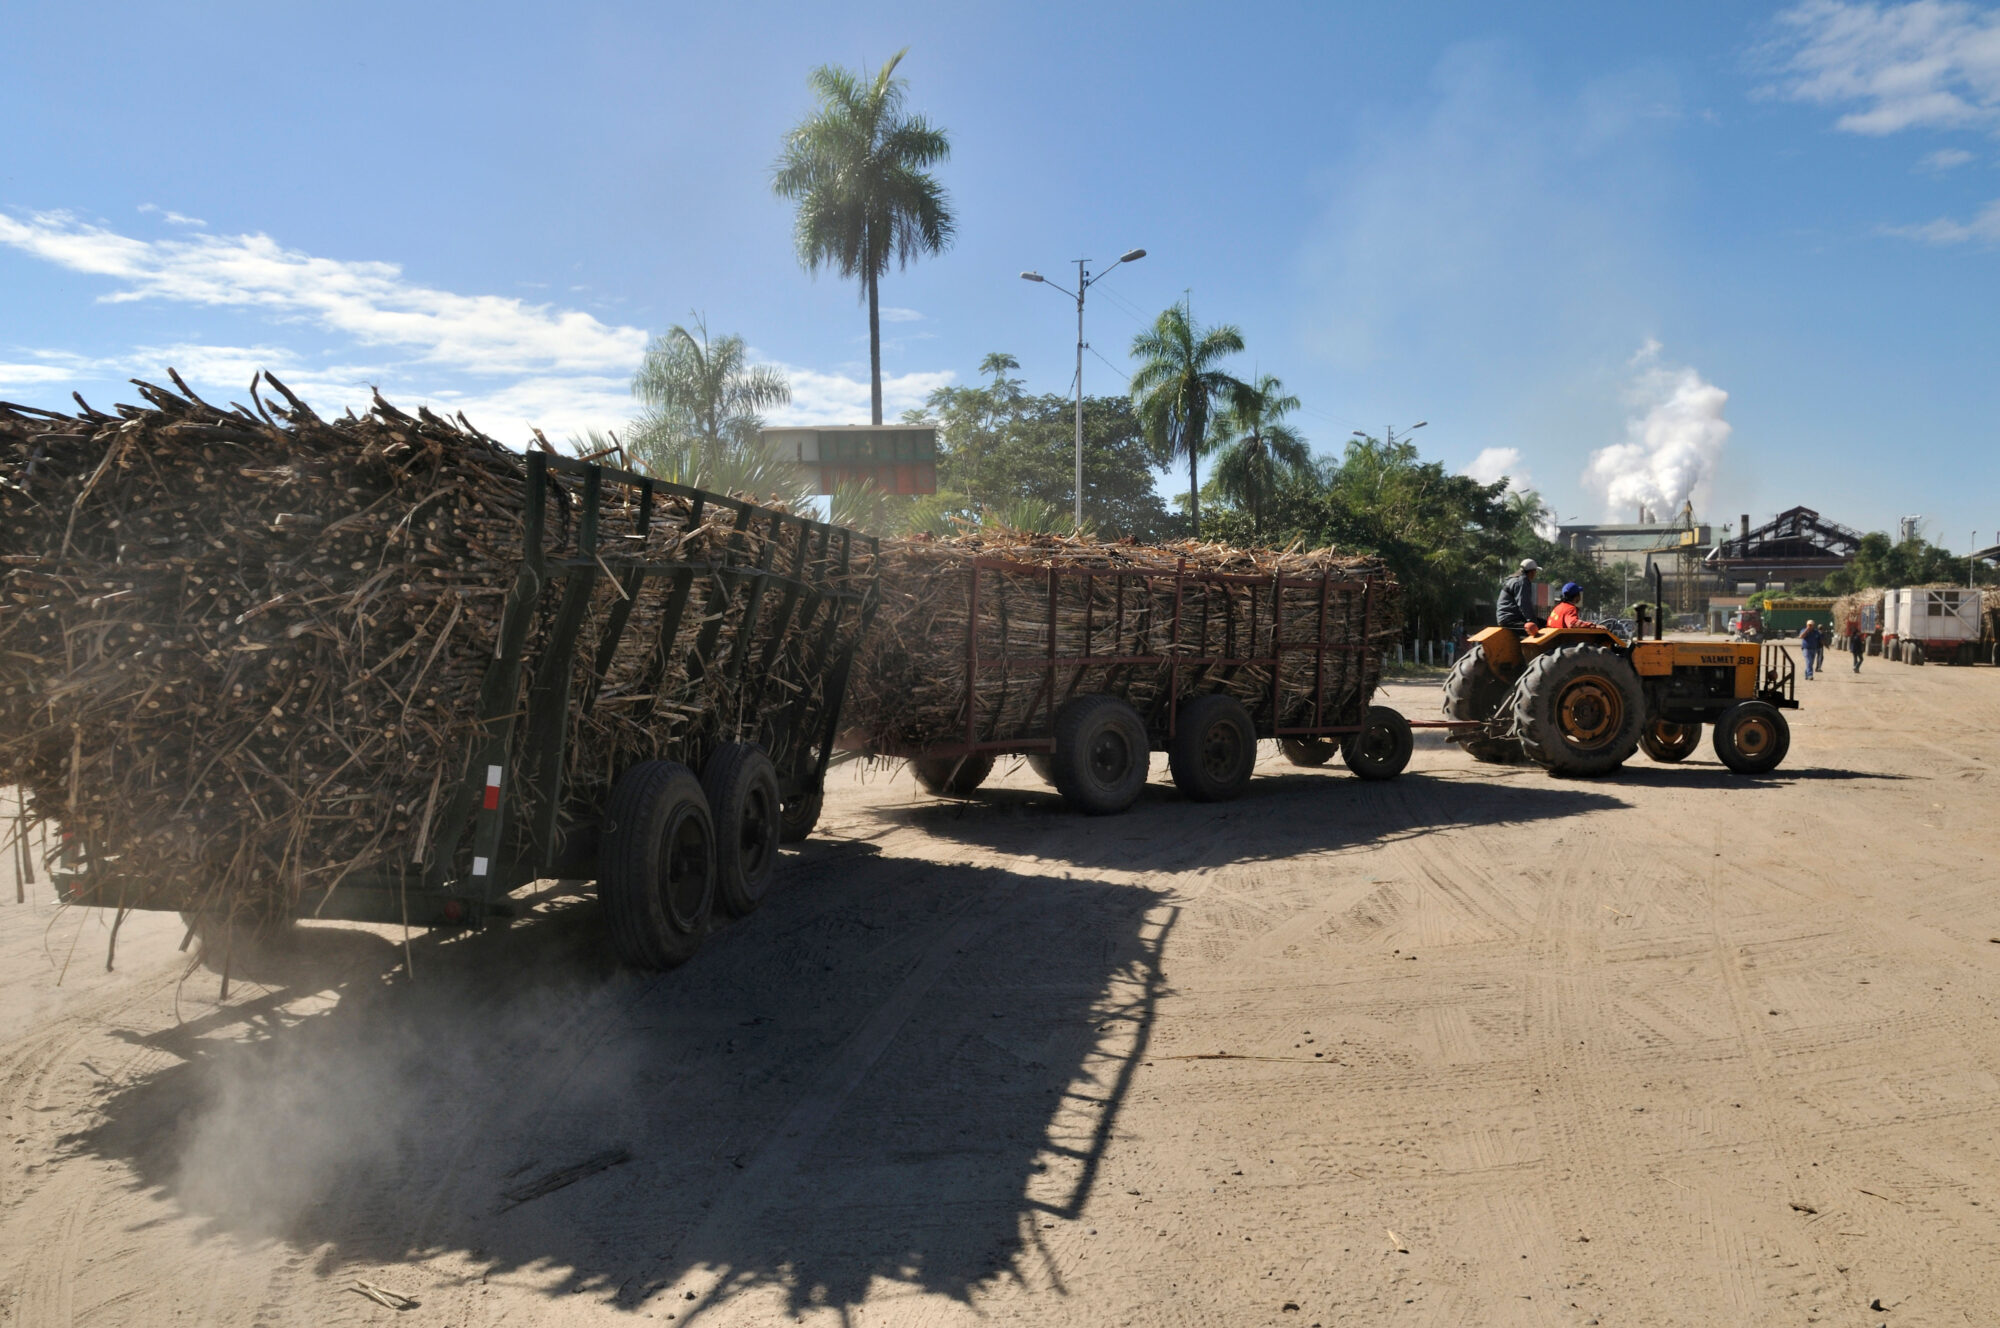 <p><span style="font-weight: 400;">A farmer delivers sugar cane for the production of ethanol and biodiesel in the Bolivian city of Montero in Santa Cruz department. The country’s government is now looking to produce biodiesel from oil palm fruit (Image</span><span style="font-weight: 400;">: Florian Kopp / </span><span style="font-weight: 400;">Alamy)</span></p>